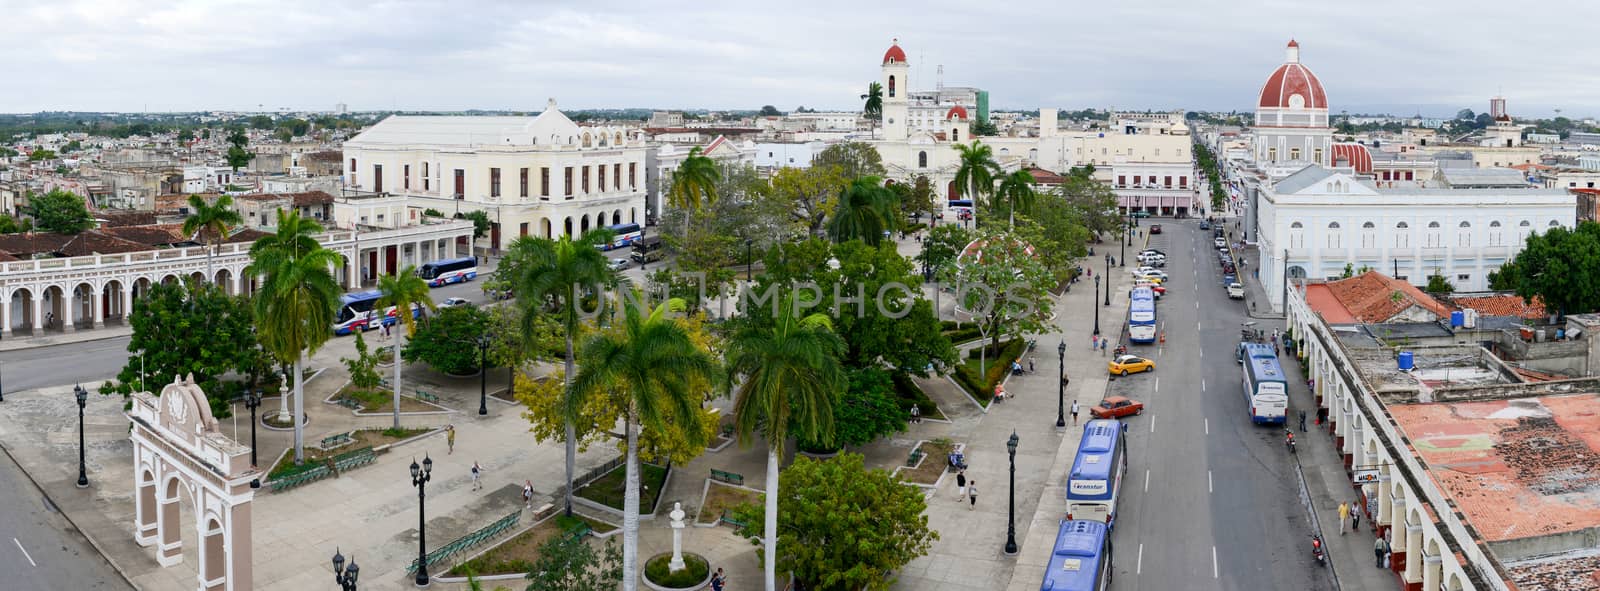 Cienfuegos, Cuba - 18 january 2016: people walking on Jose Marti park with Town Hall and Cathedral of Cienfuegos on Cuba